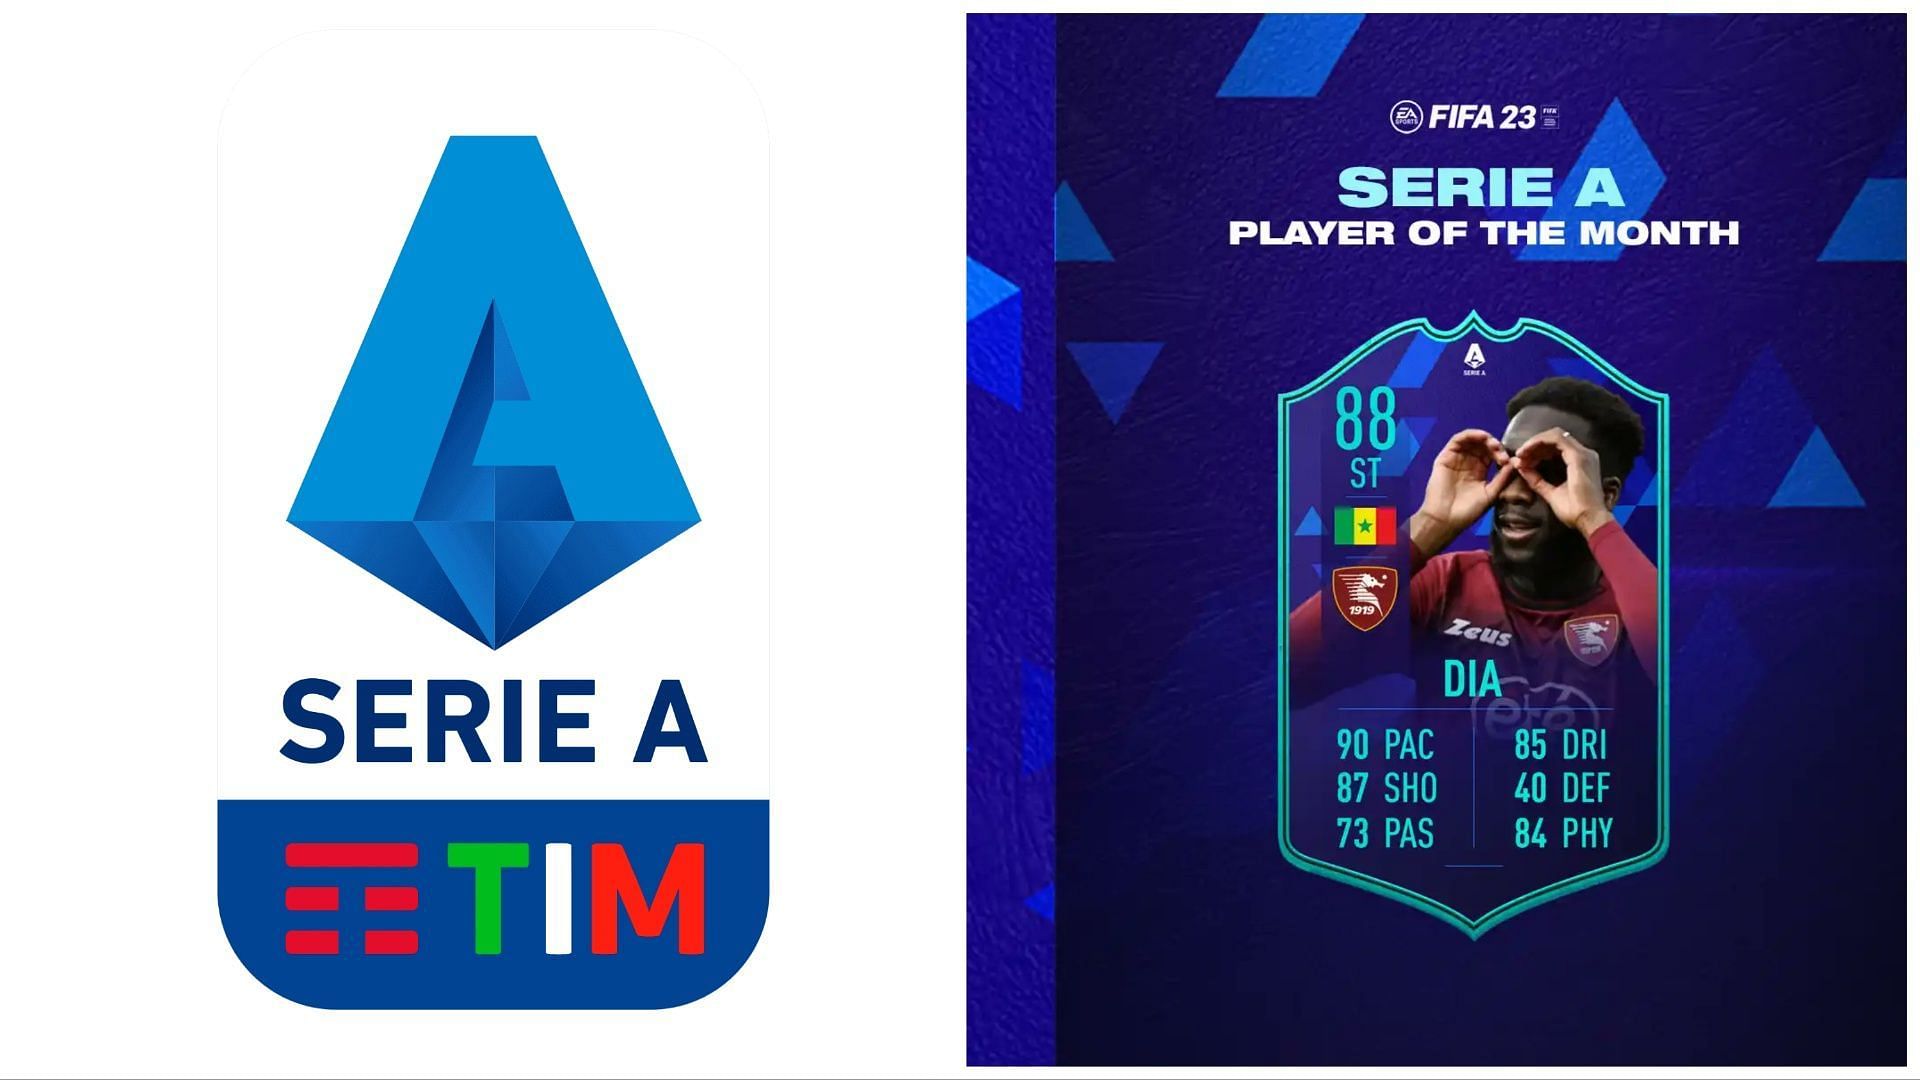 POTM Dia has been leaked (Images via Serie A TIM and Twitter/FIFAUTeam)